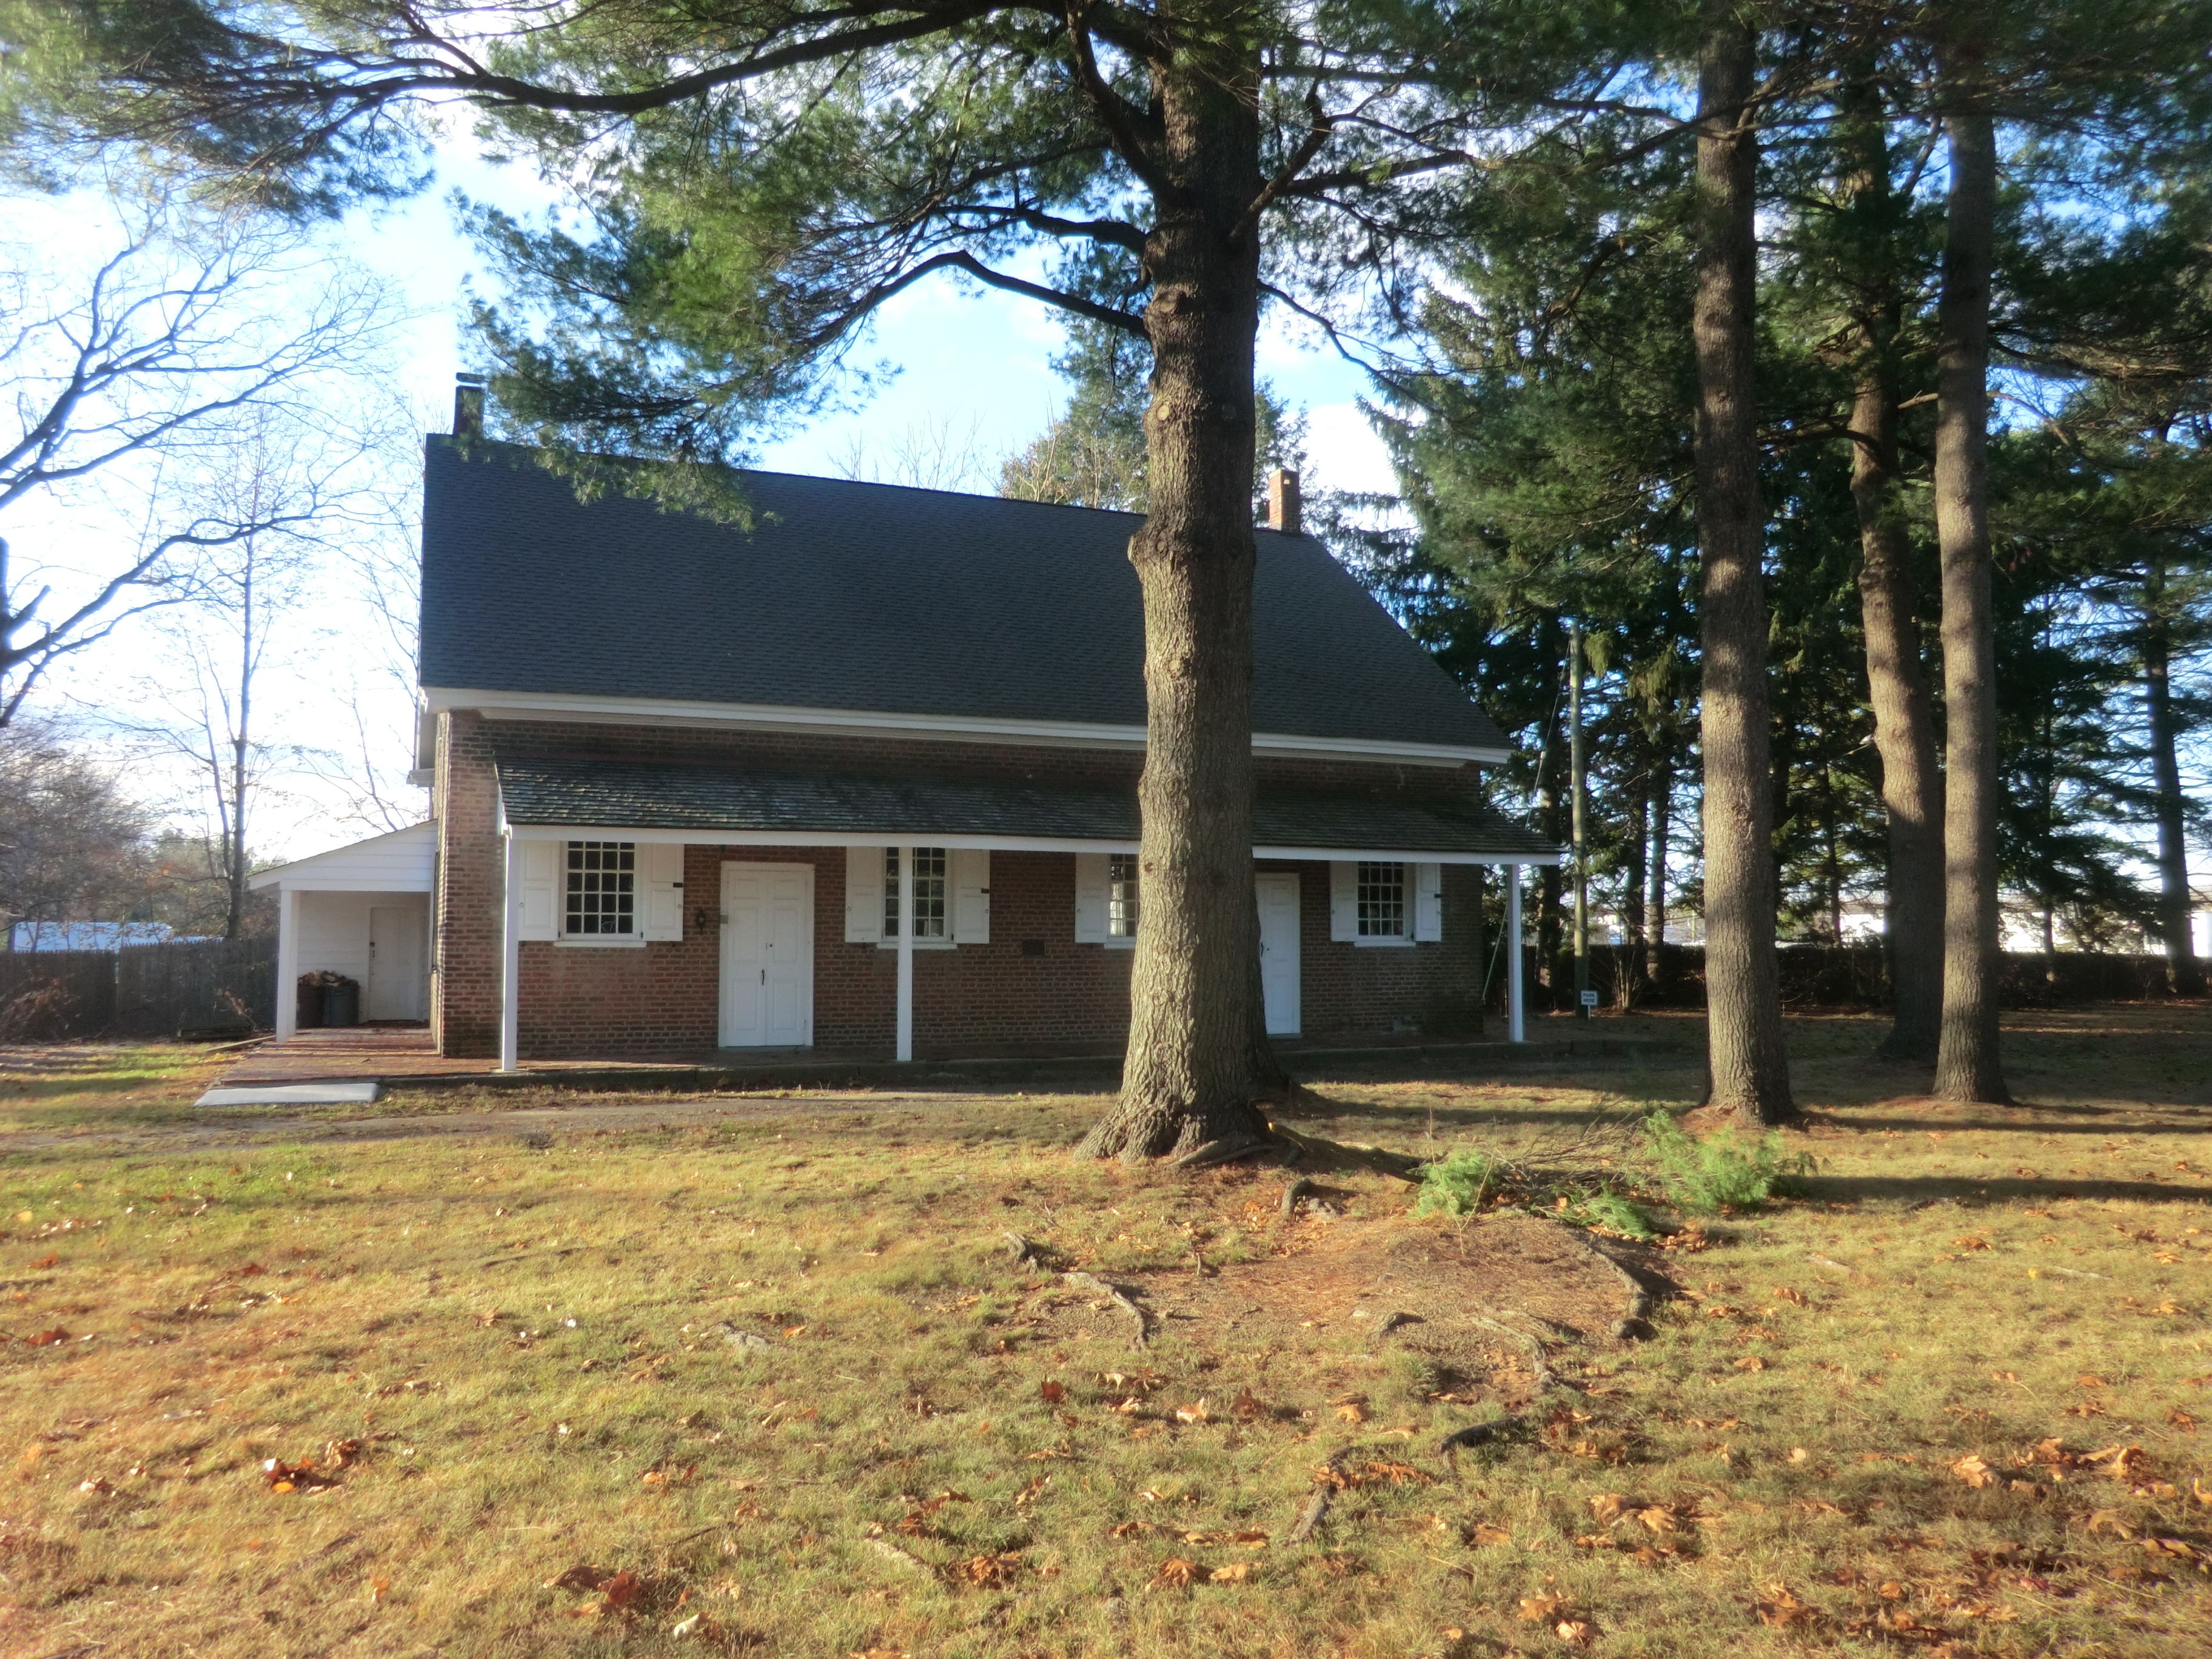 Cropwell Friends Meeting House